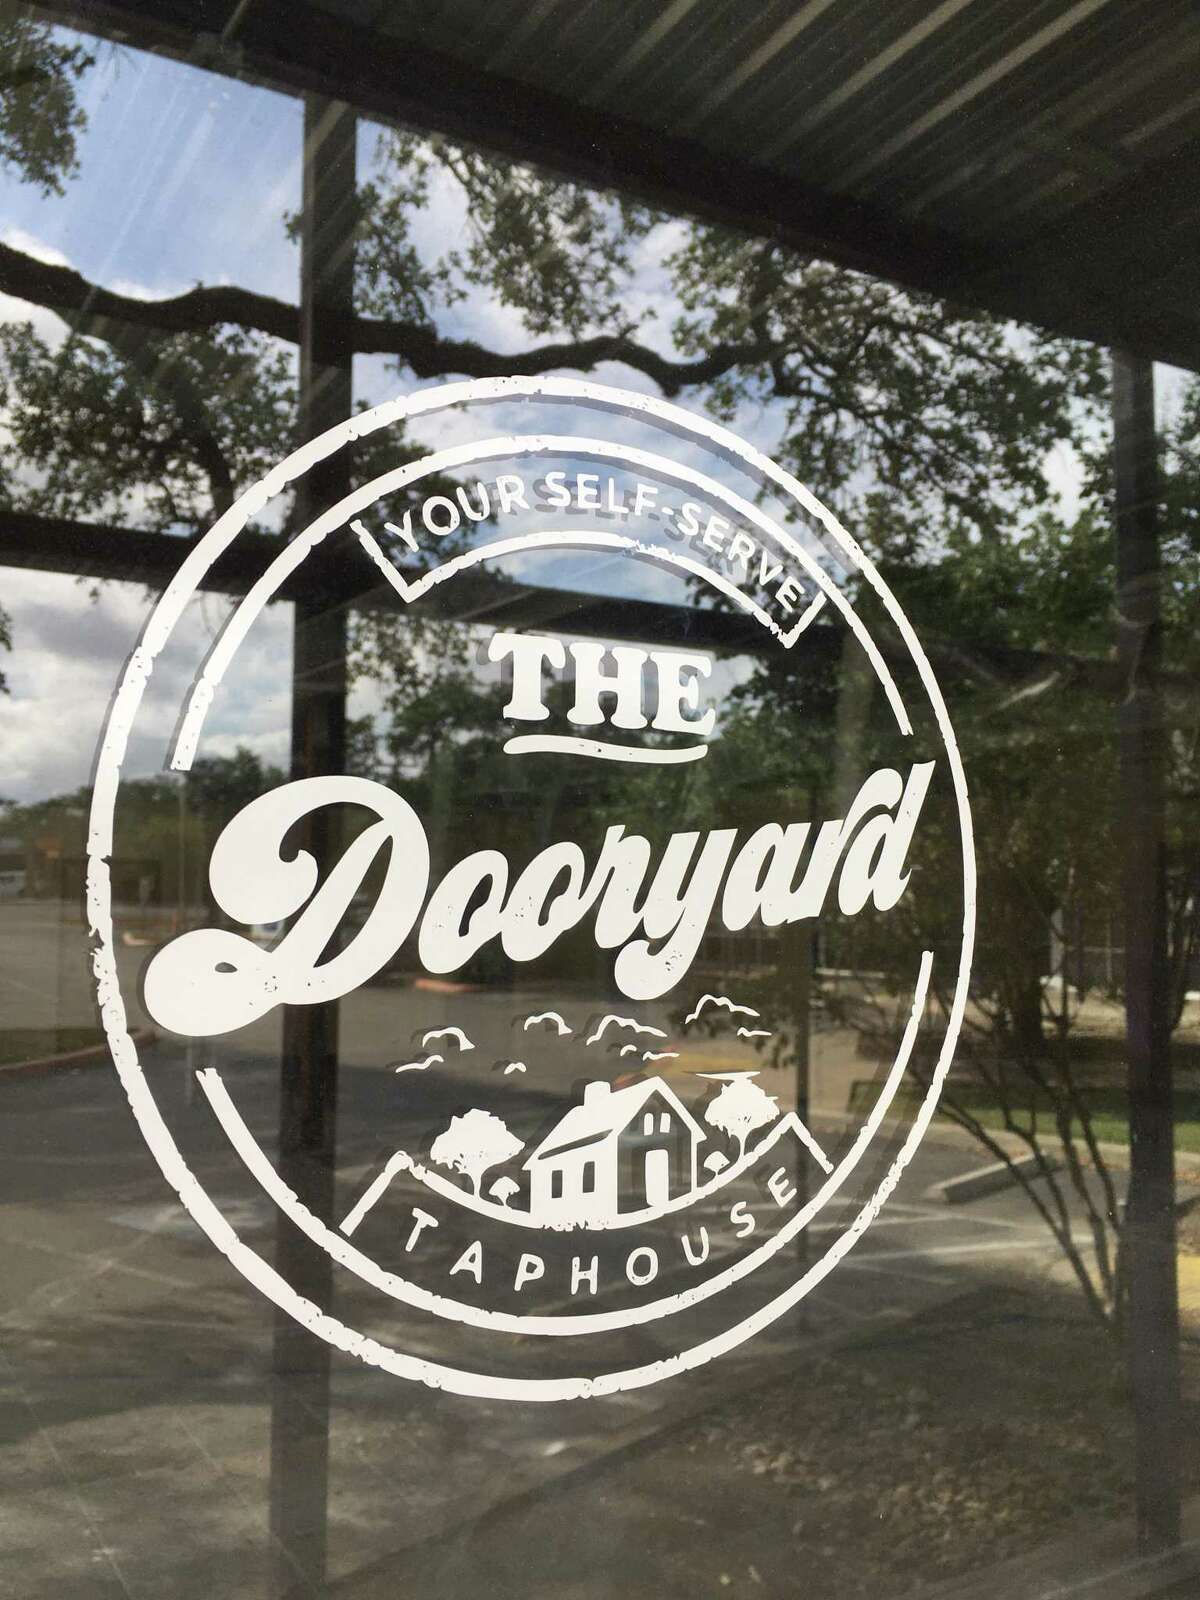 The Dooryard is located at 4503 De Zavala Road and is expected to open in September. It will have a full kitchen and a self-serve tap system that will allow customers to pour their own beers, seltzers and wines.